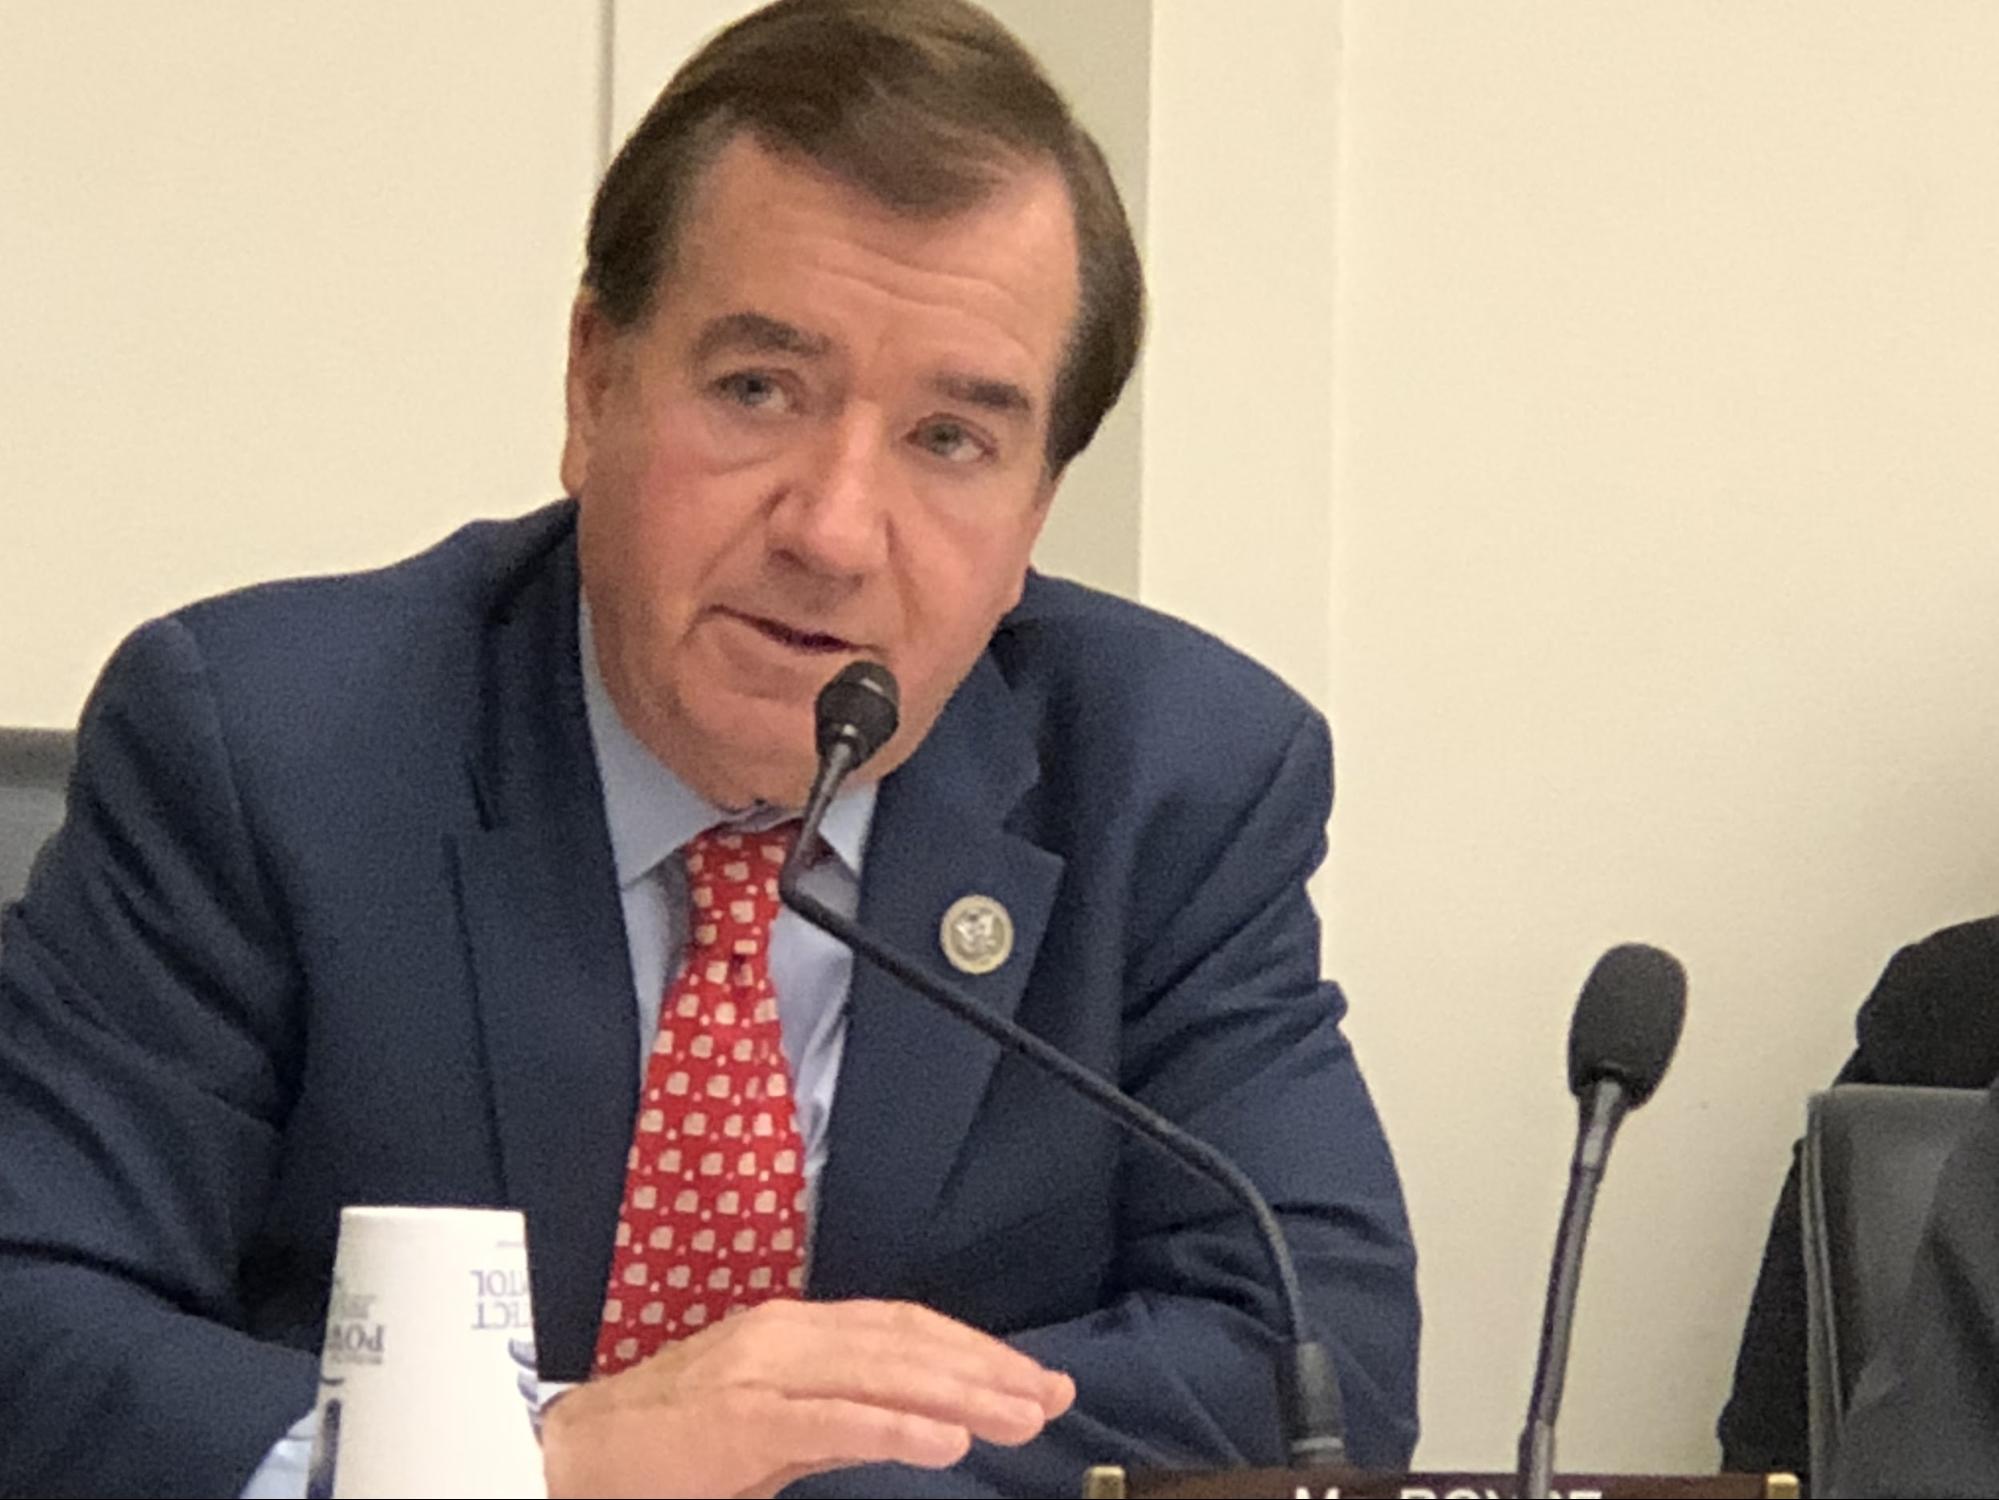 House Foreign Affairs Committee Chairman Ed Royce at the December 12th hearing before the Asia Subcommittee of the House Foreign Affairs Committee ​​​​​​​